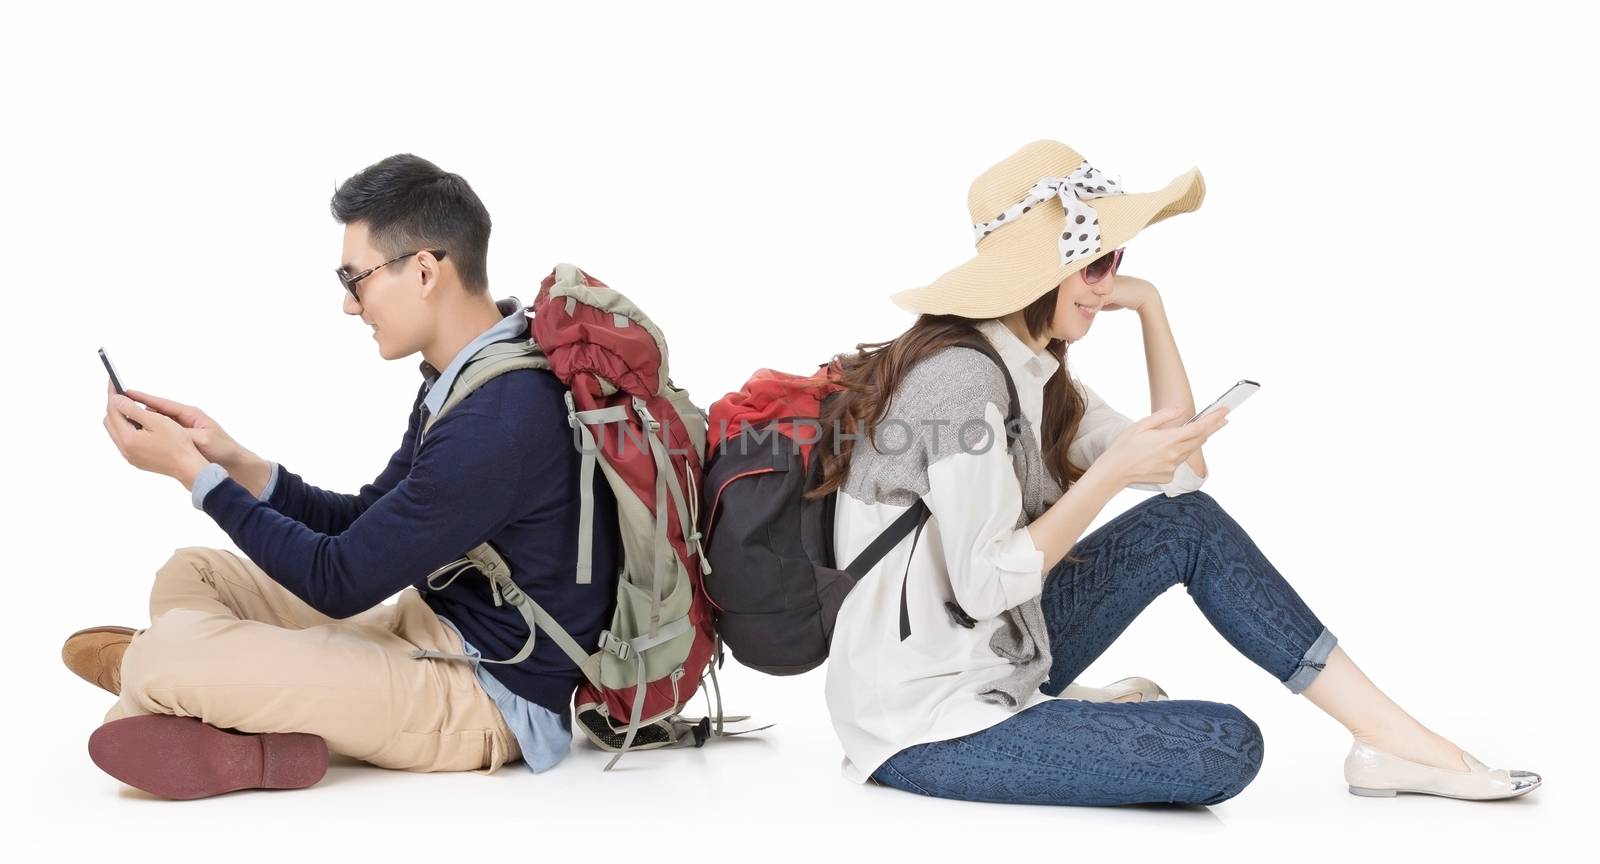 Asian young couple traveling and sitting on ground back to back and using mobile phone, full length portrait on white background.